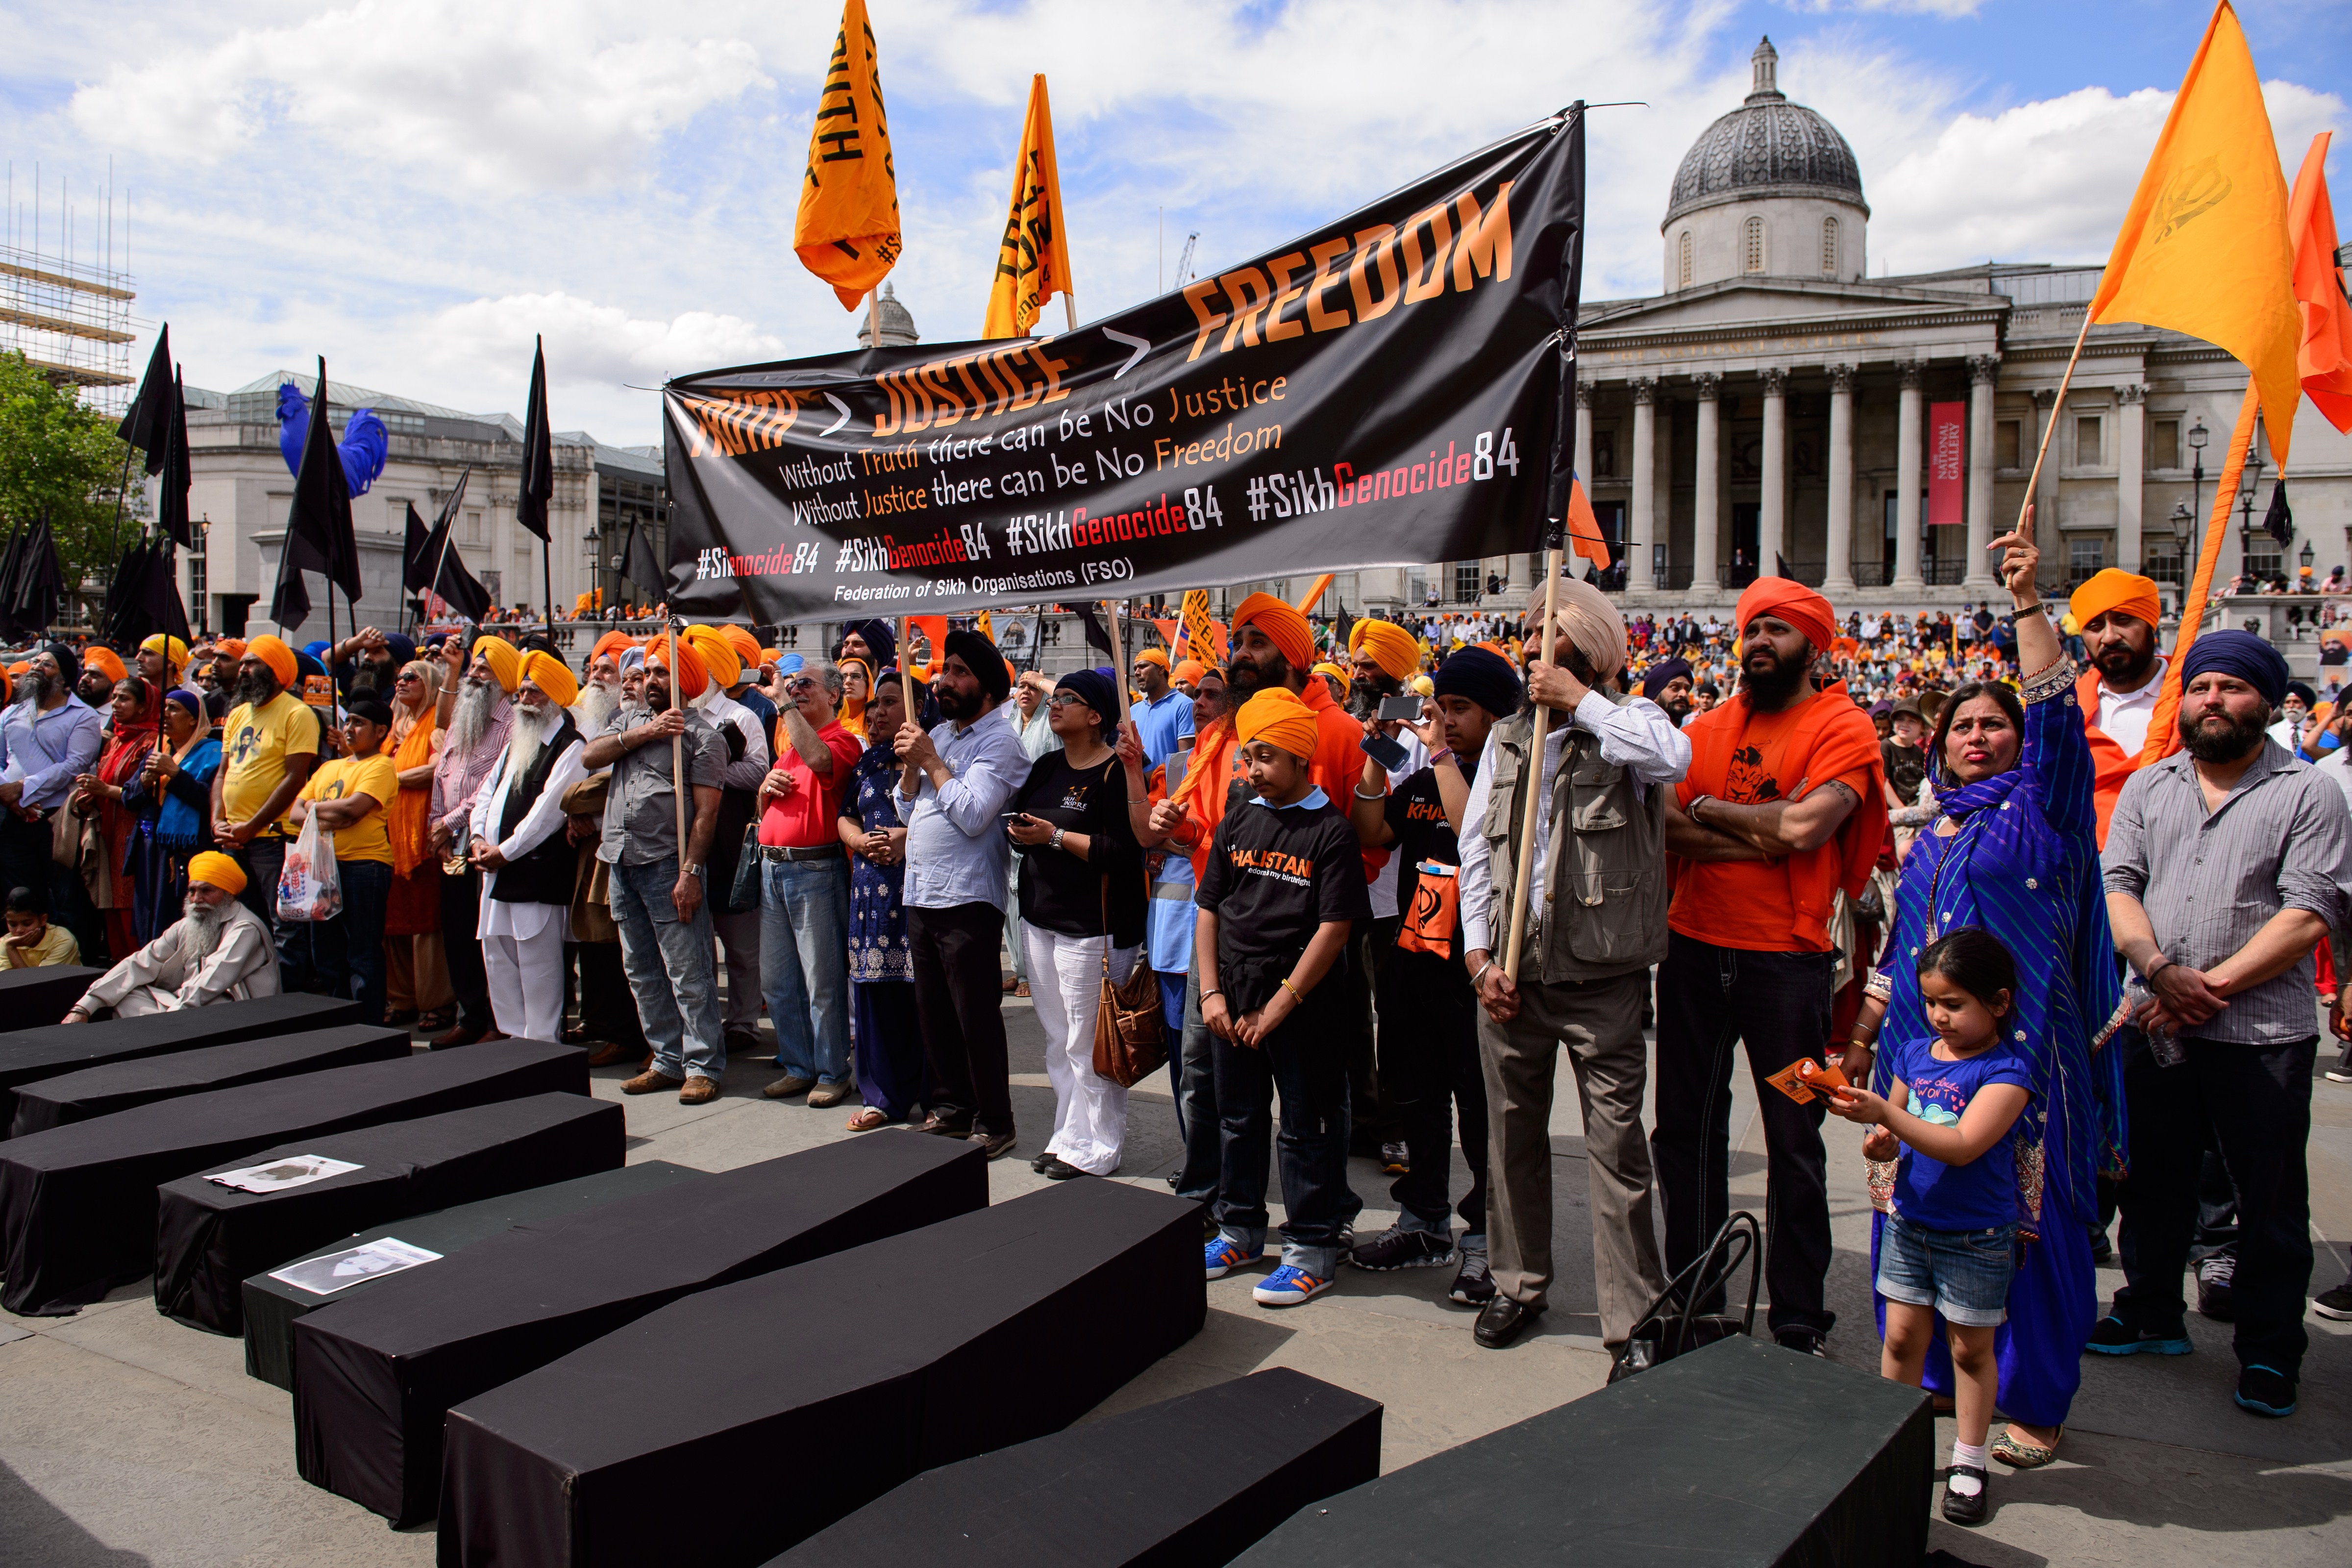 Members of the Sikh community hold aloft a banner calling for the 1984 storming of Sikhism's holiest shrine, the Golden Temple in Amritsar, by Indian troops, to be recognised as genocide as they join a demonstration in central London on June 8, 2014, to mark the 30th anniversary of the assault known as Operation Blue Star. (LEON NEAL—AFP/Getty Images)